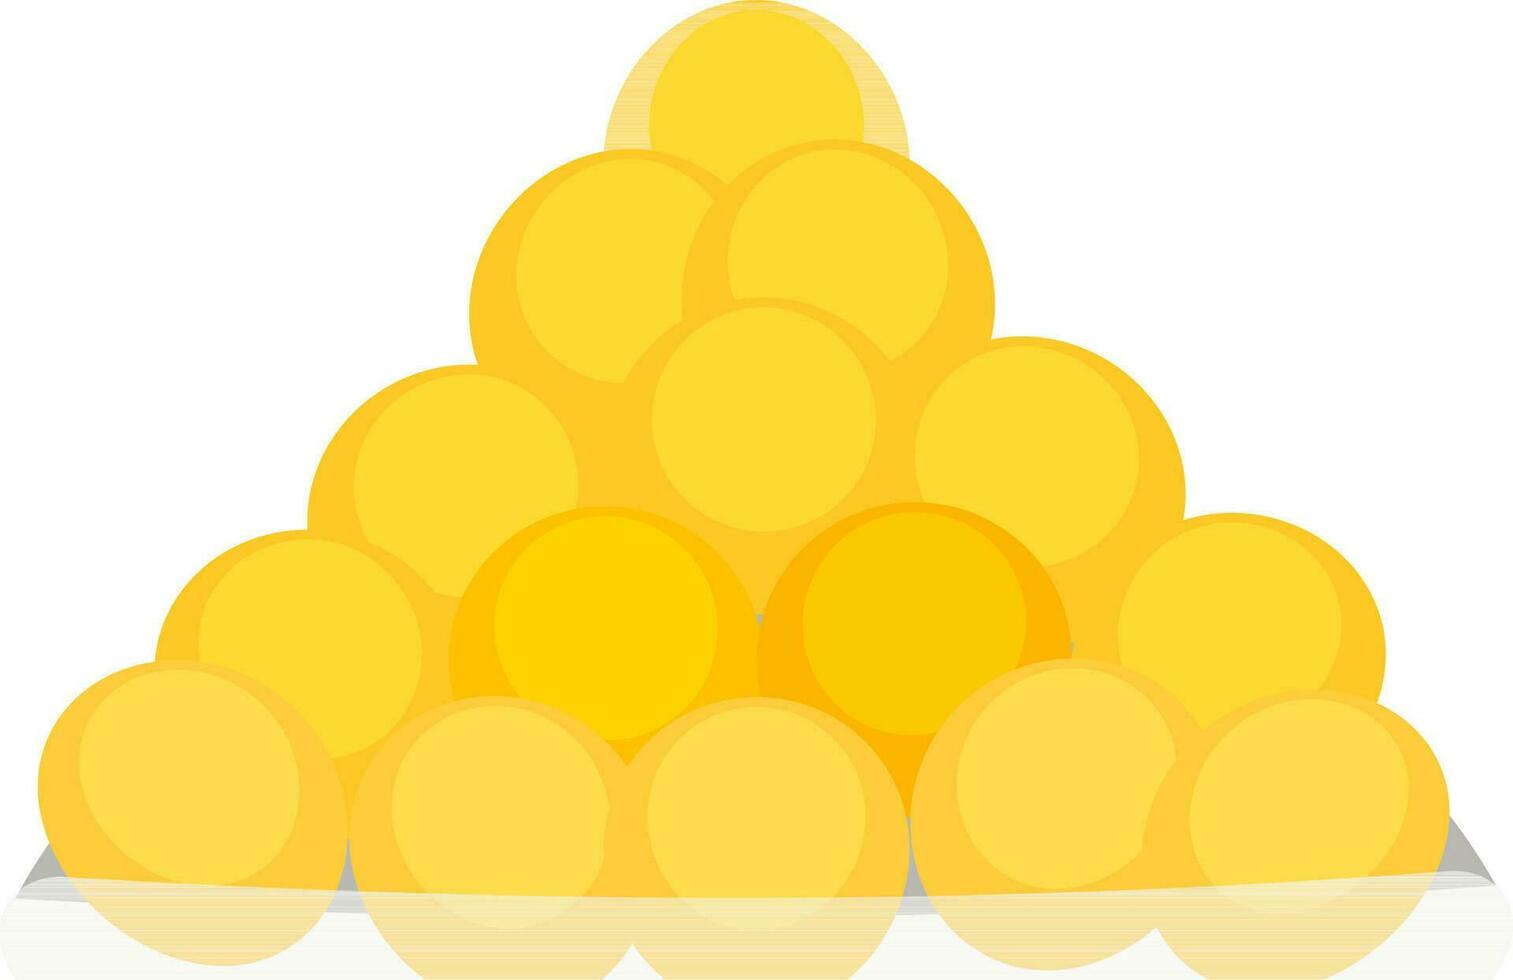 Flat Style Sweet Balls Laddu Element In Yellow Color. vector